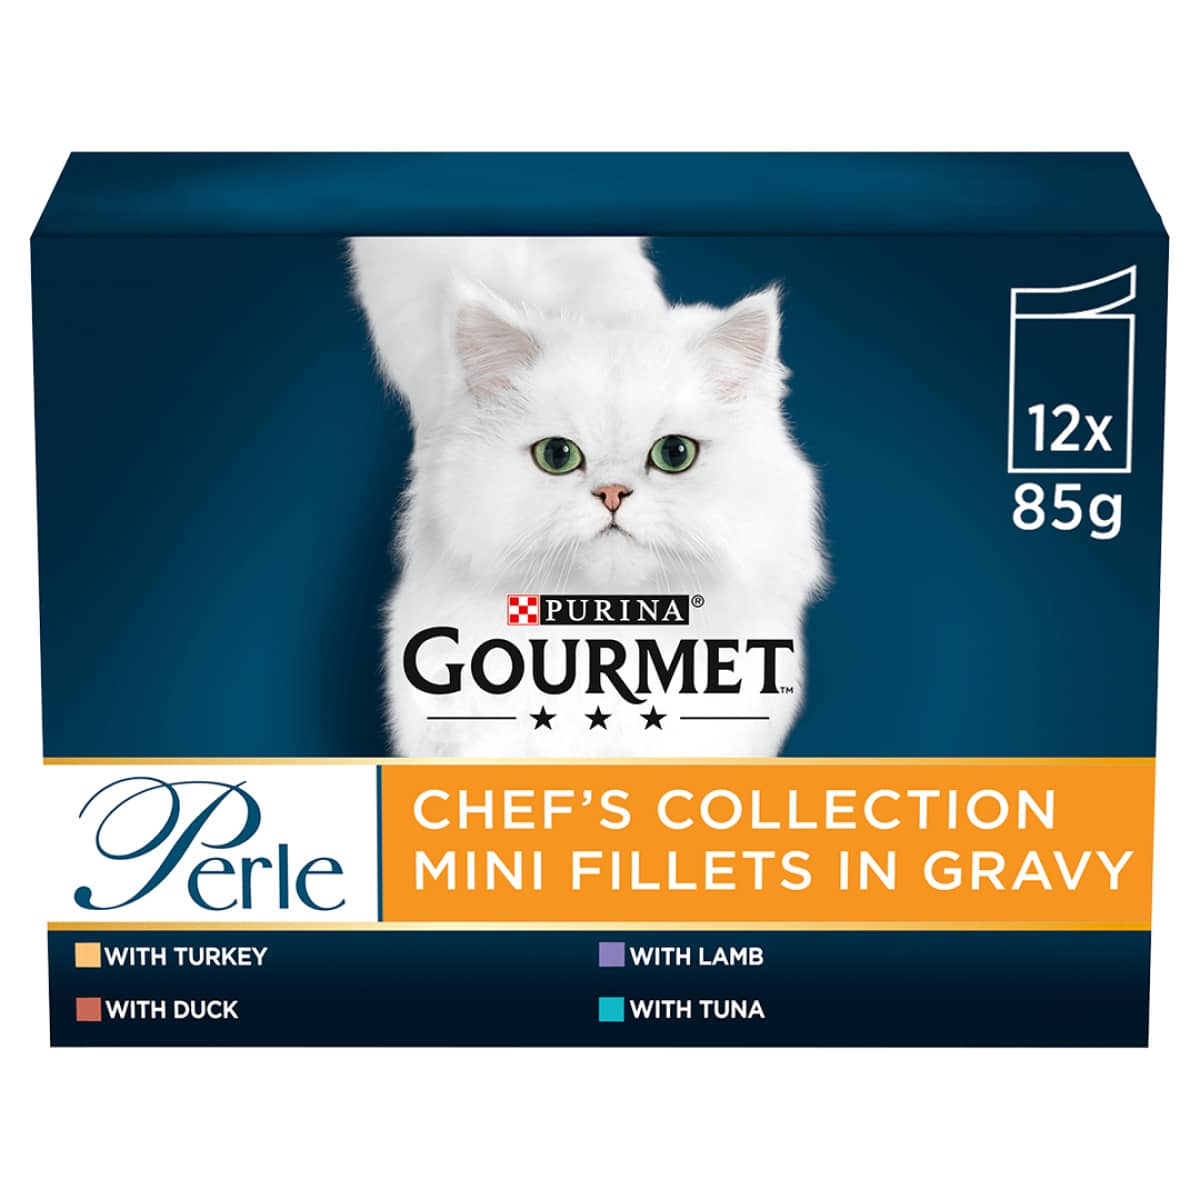 Gourmet Perle Chefs Collection 12 x 85g Main Image